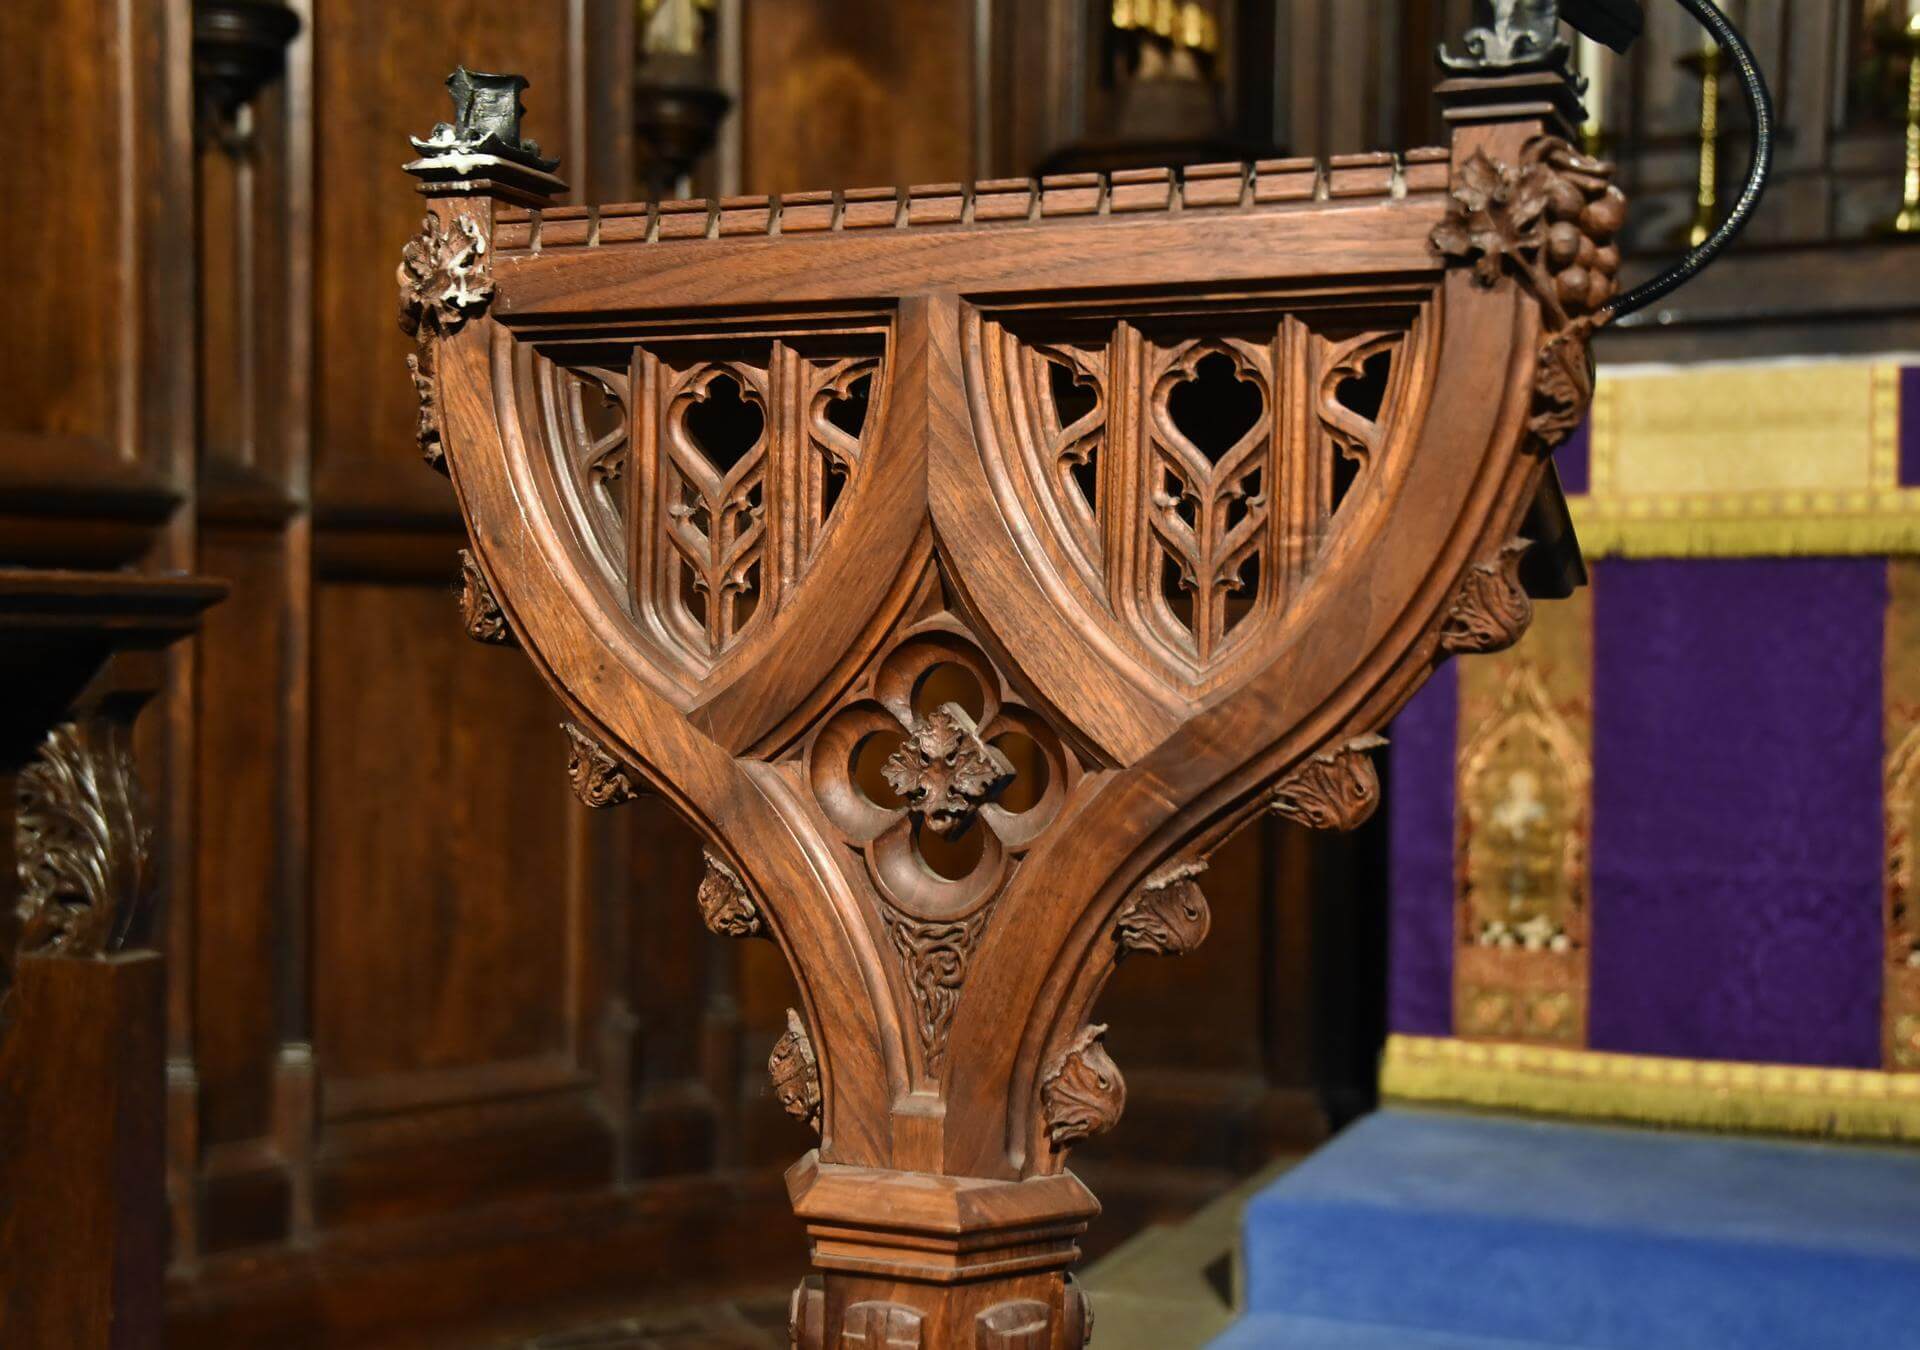 Woodwork for Western Churches